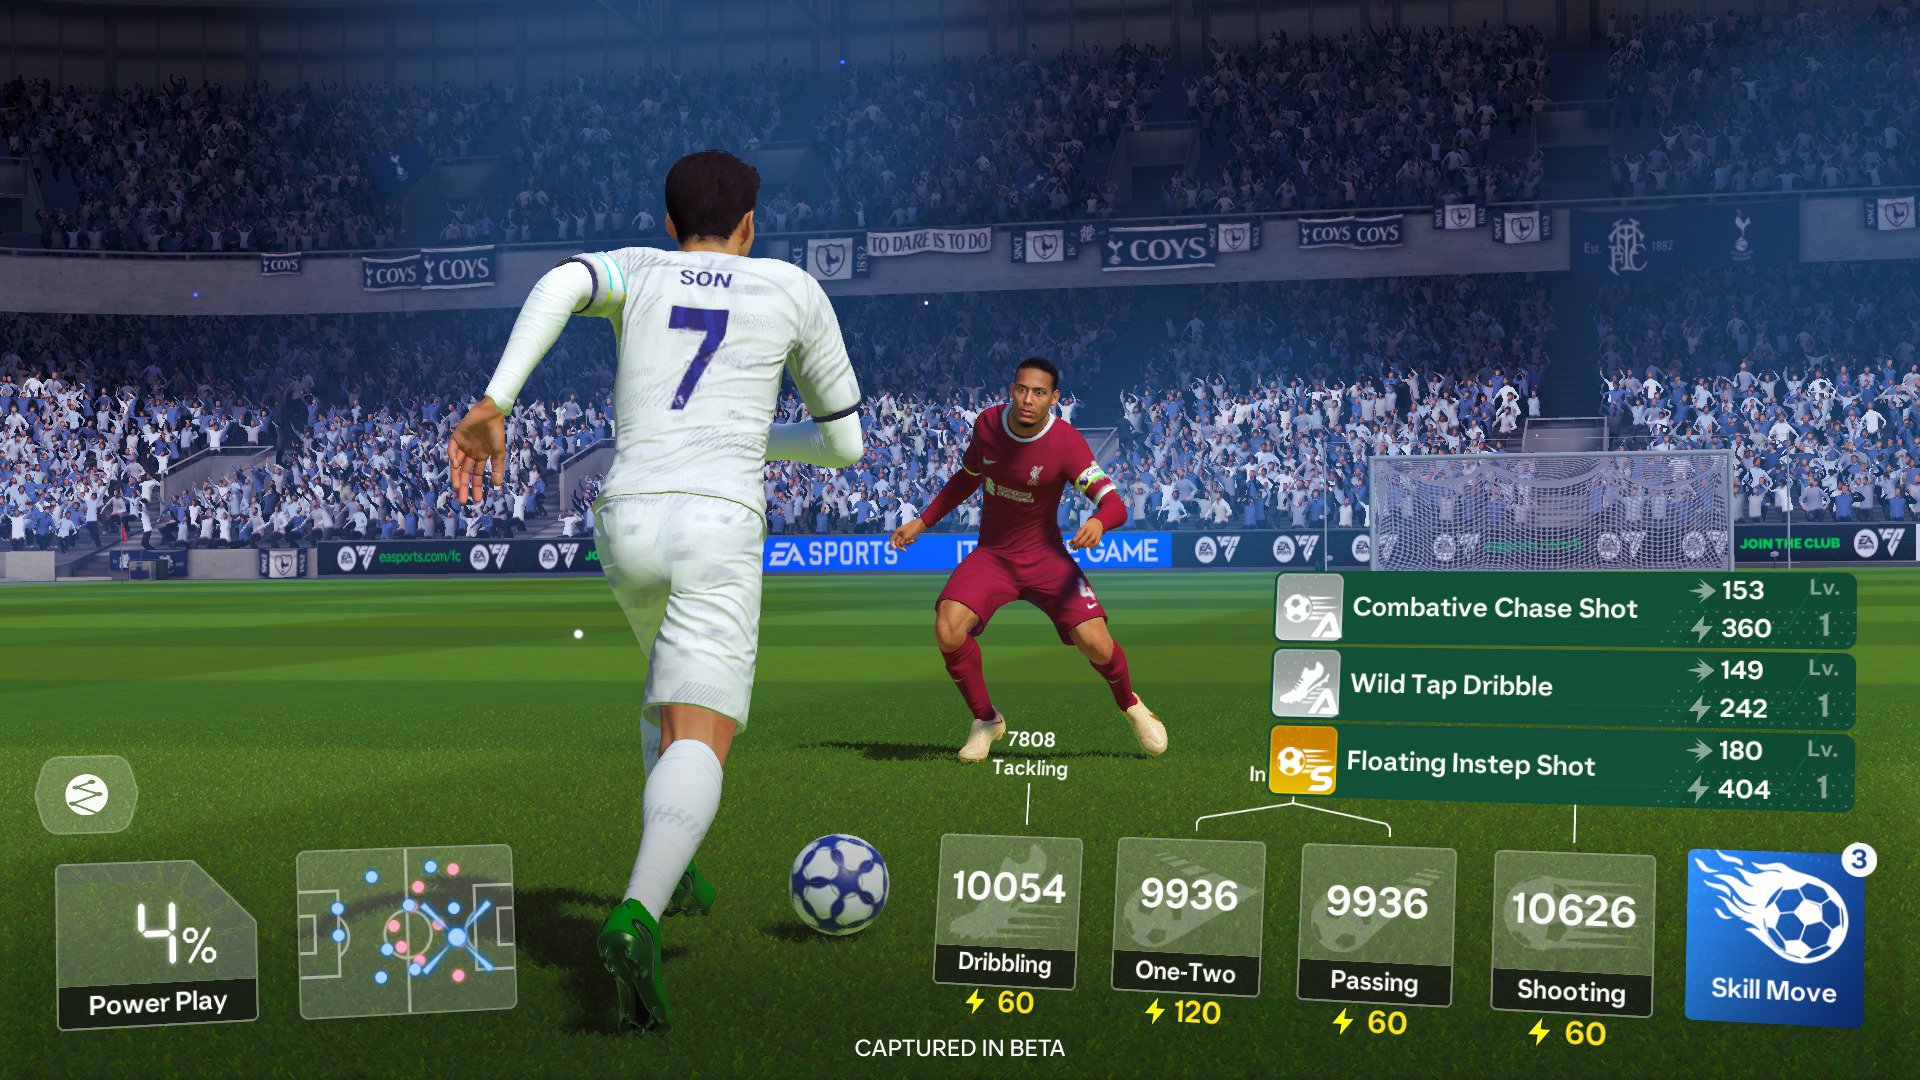 FIFA 23 MOBILE BETA Gameplay (Android, iOS) - Part 1 